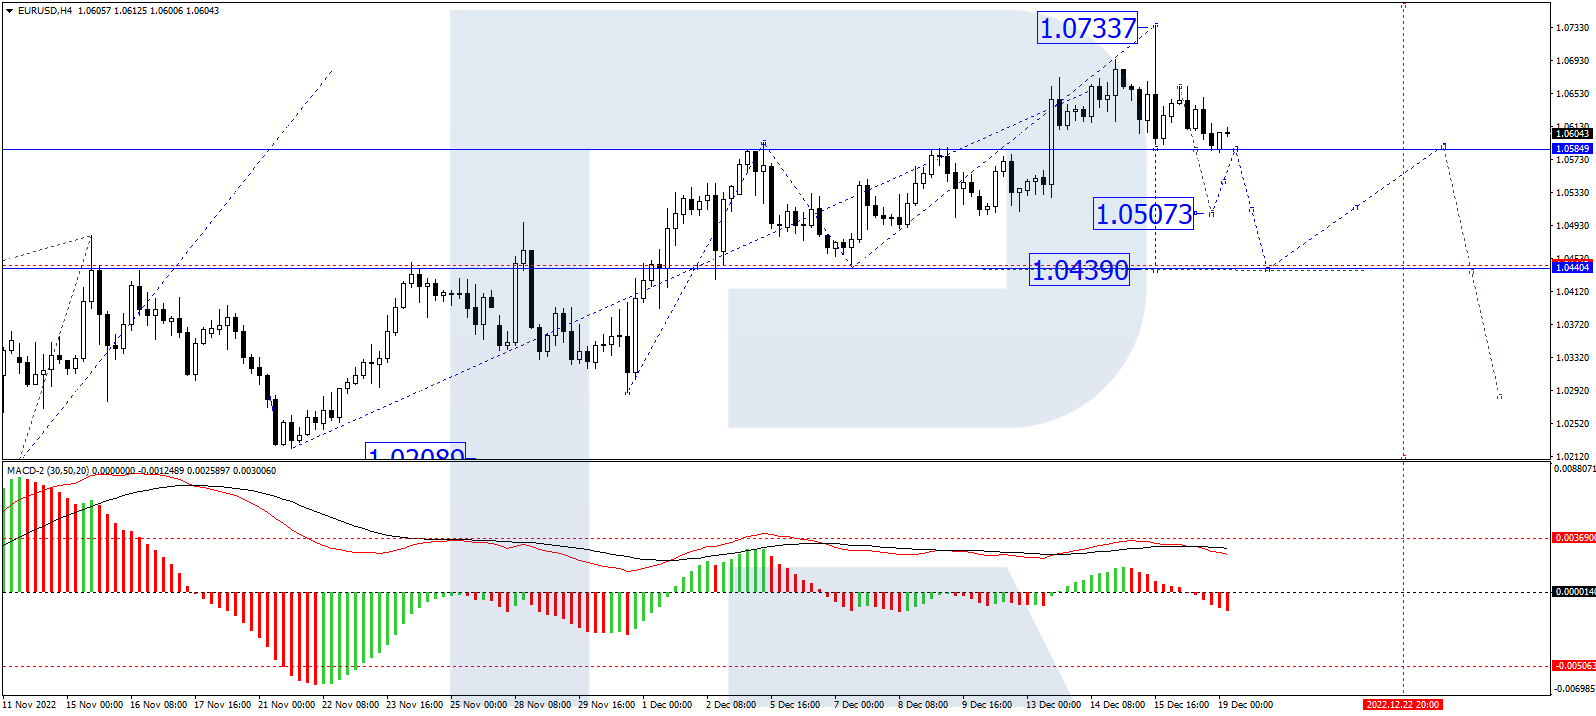 On H4, the pair has completed an impulse of decline to 1.0586